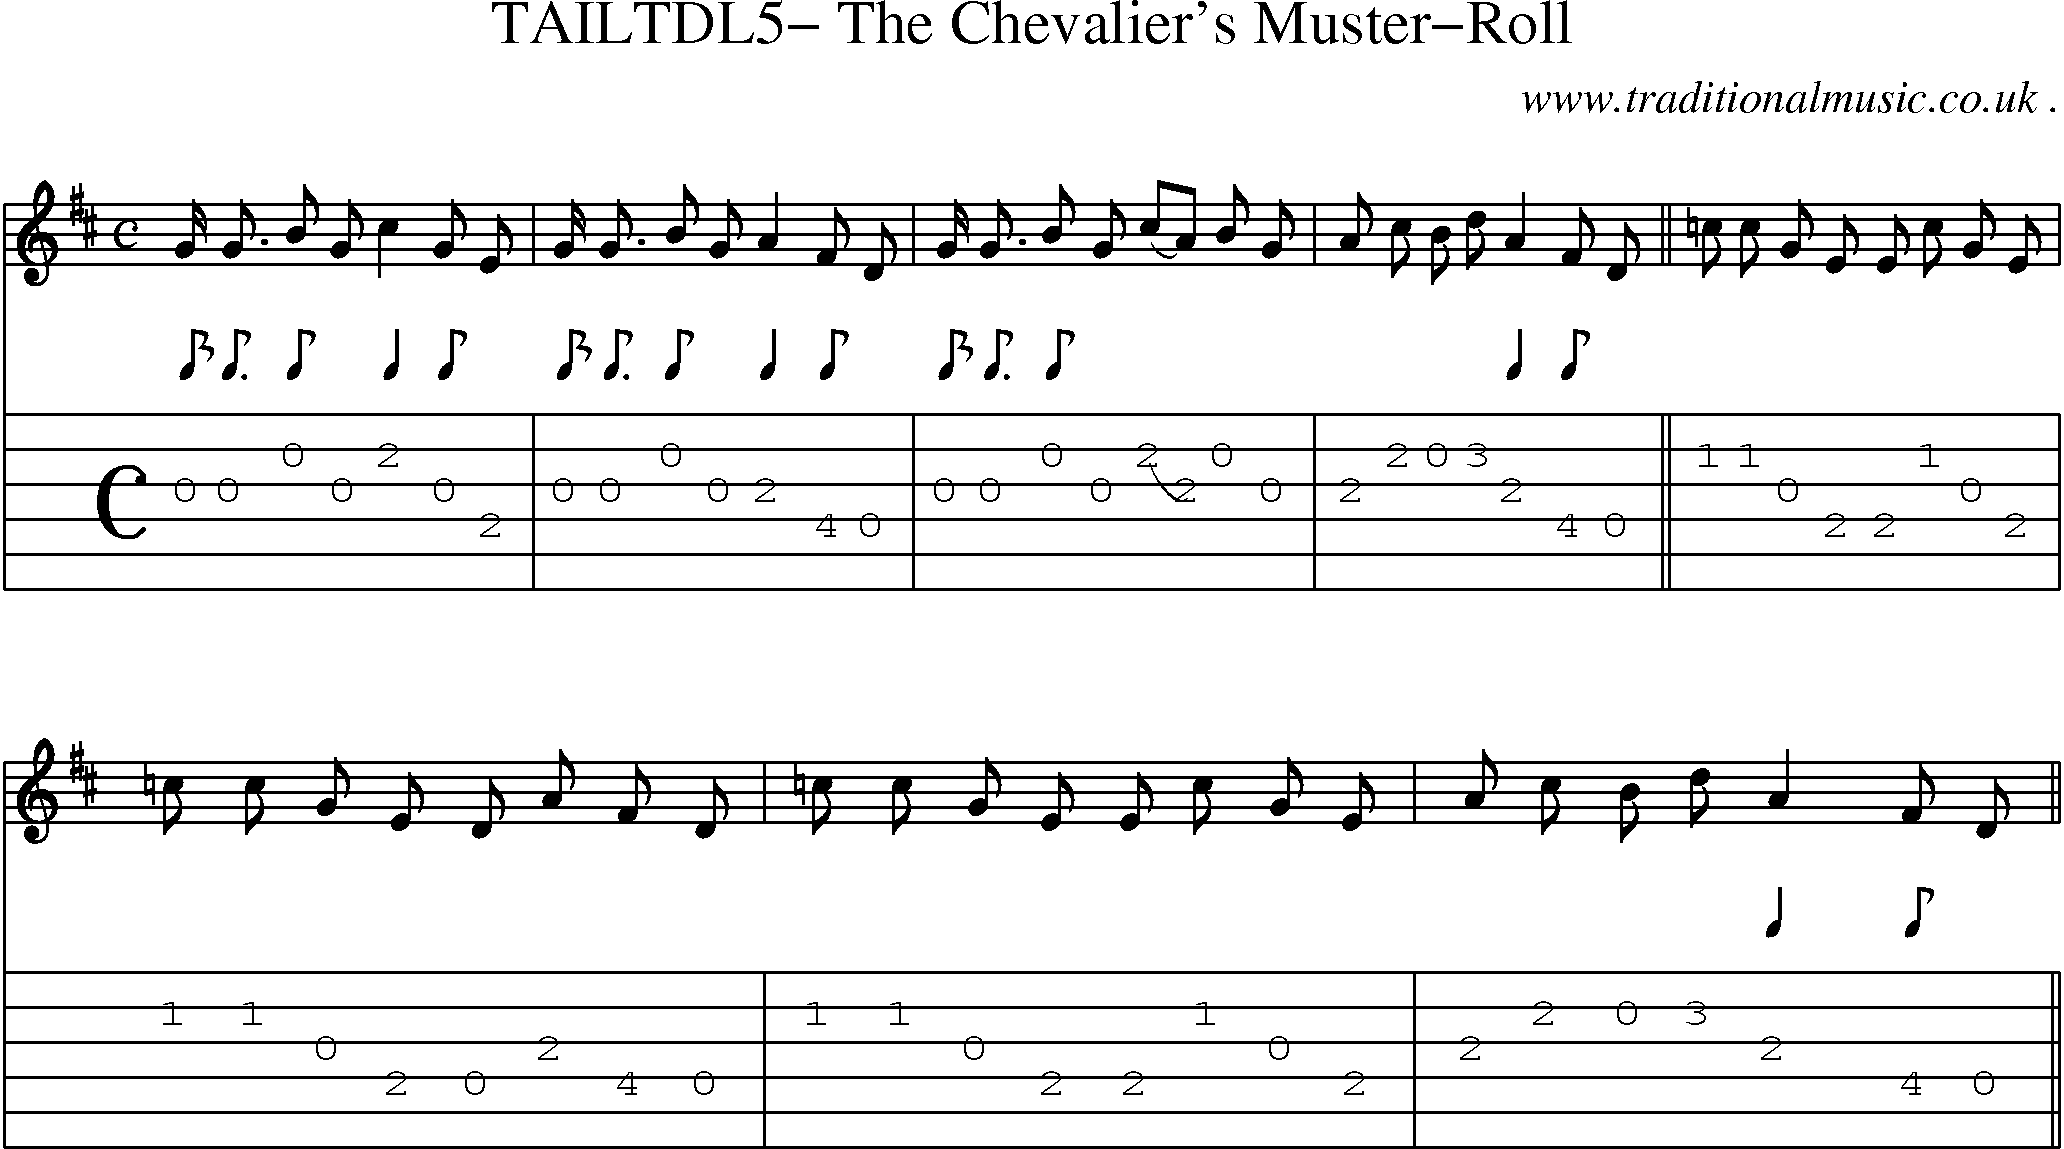 Sheet-Music and Guitar Tabs for Tailtdl5 The Chevaliers Muster-roll